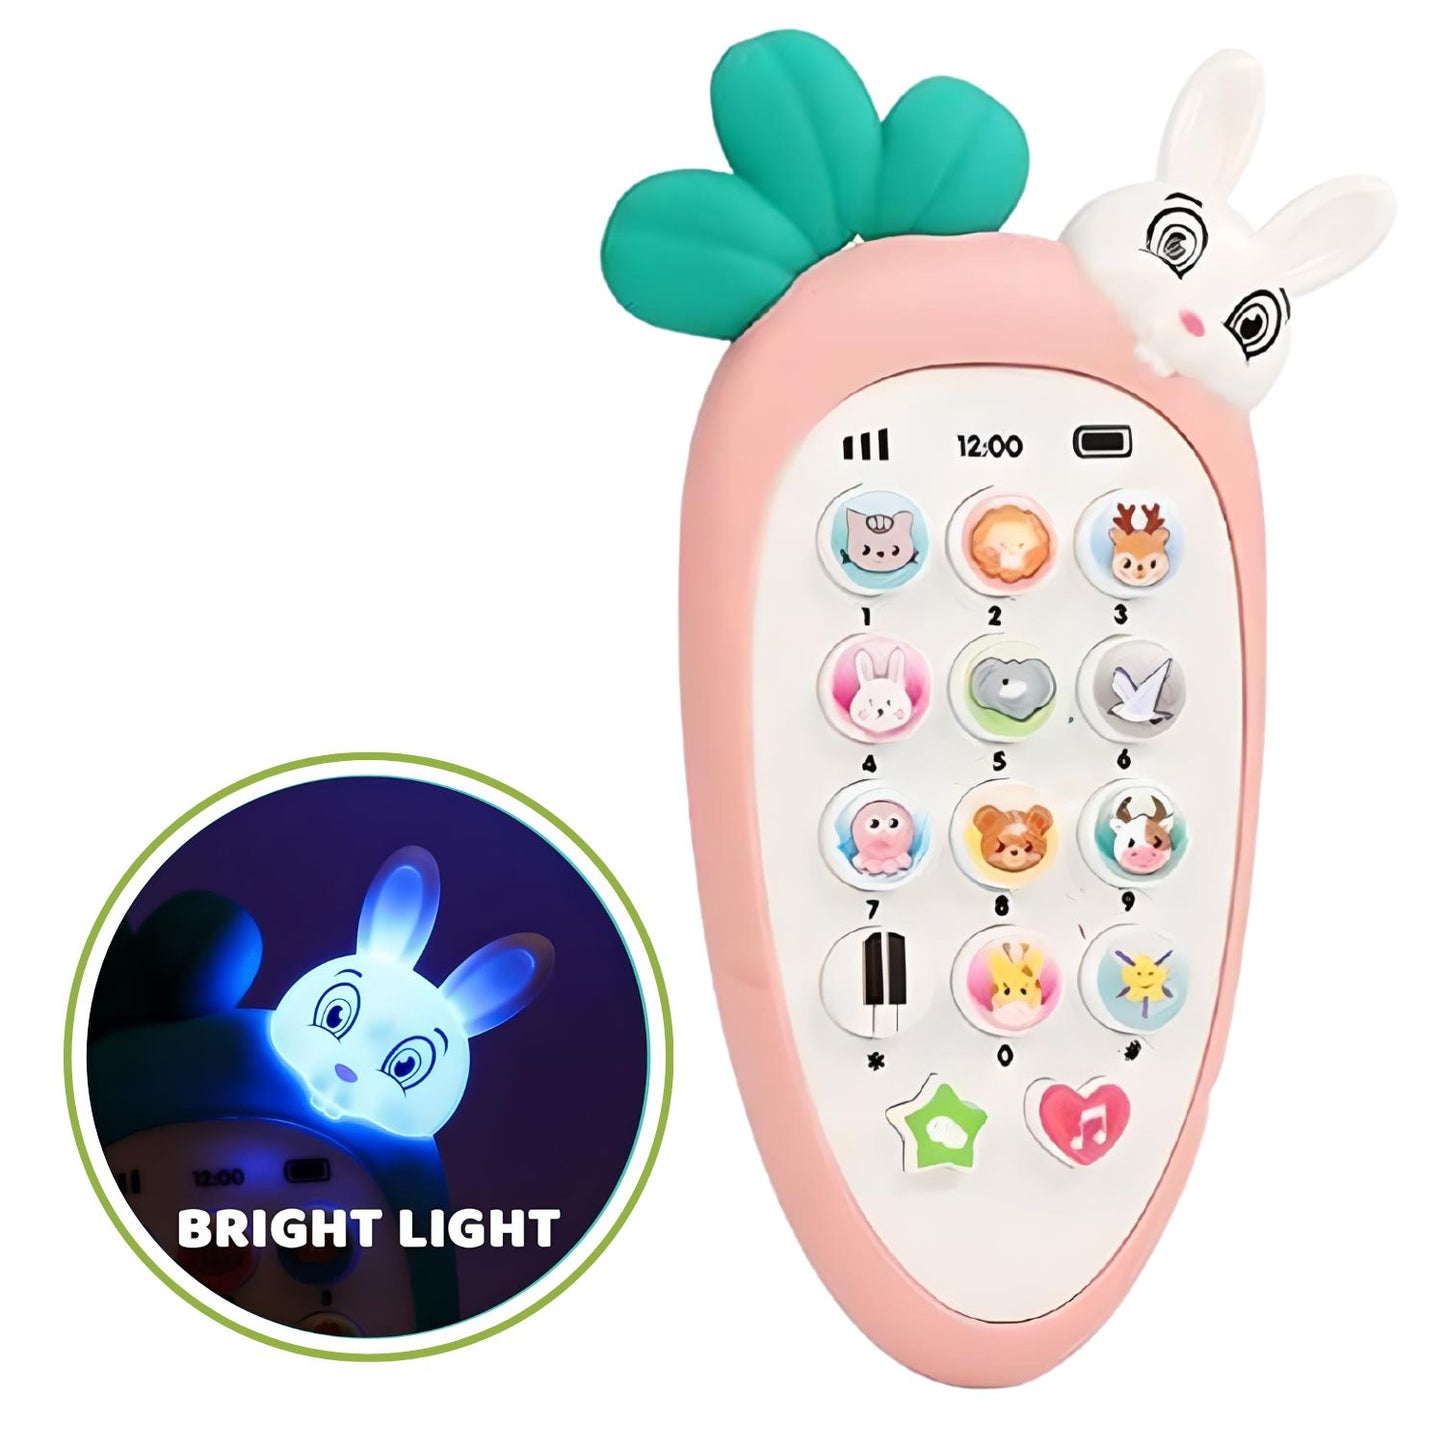 Kids Smart Mobile Phone Toy with Rabbit Design: Cordless, Musical Sounds, Smart Lights - Battery Operated, Ideal Birthday Gift for Boys and Girls (1 Pack)